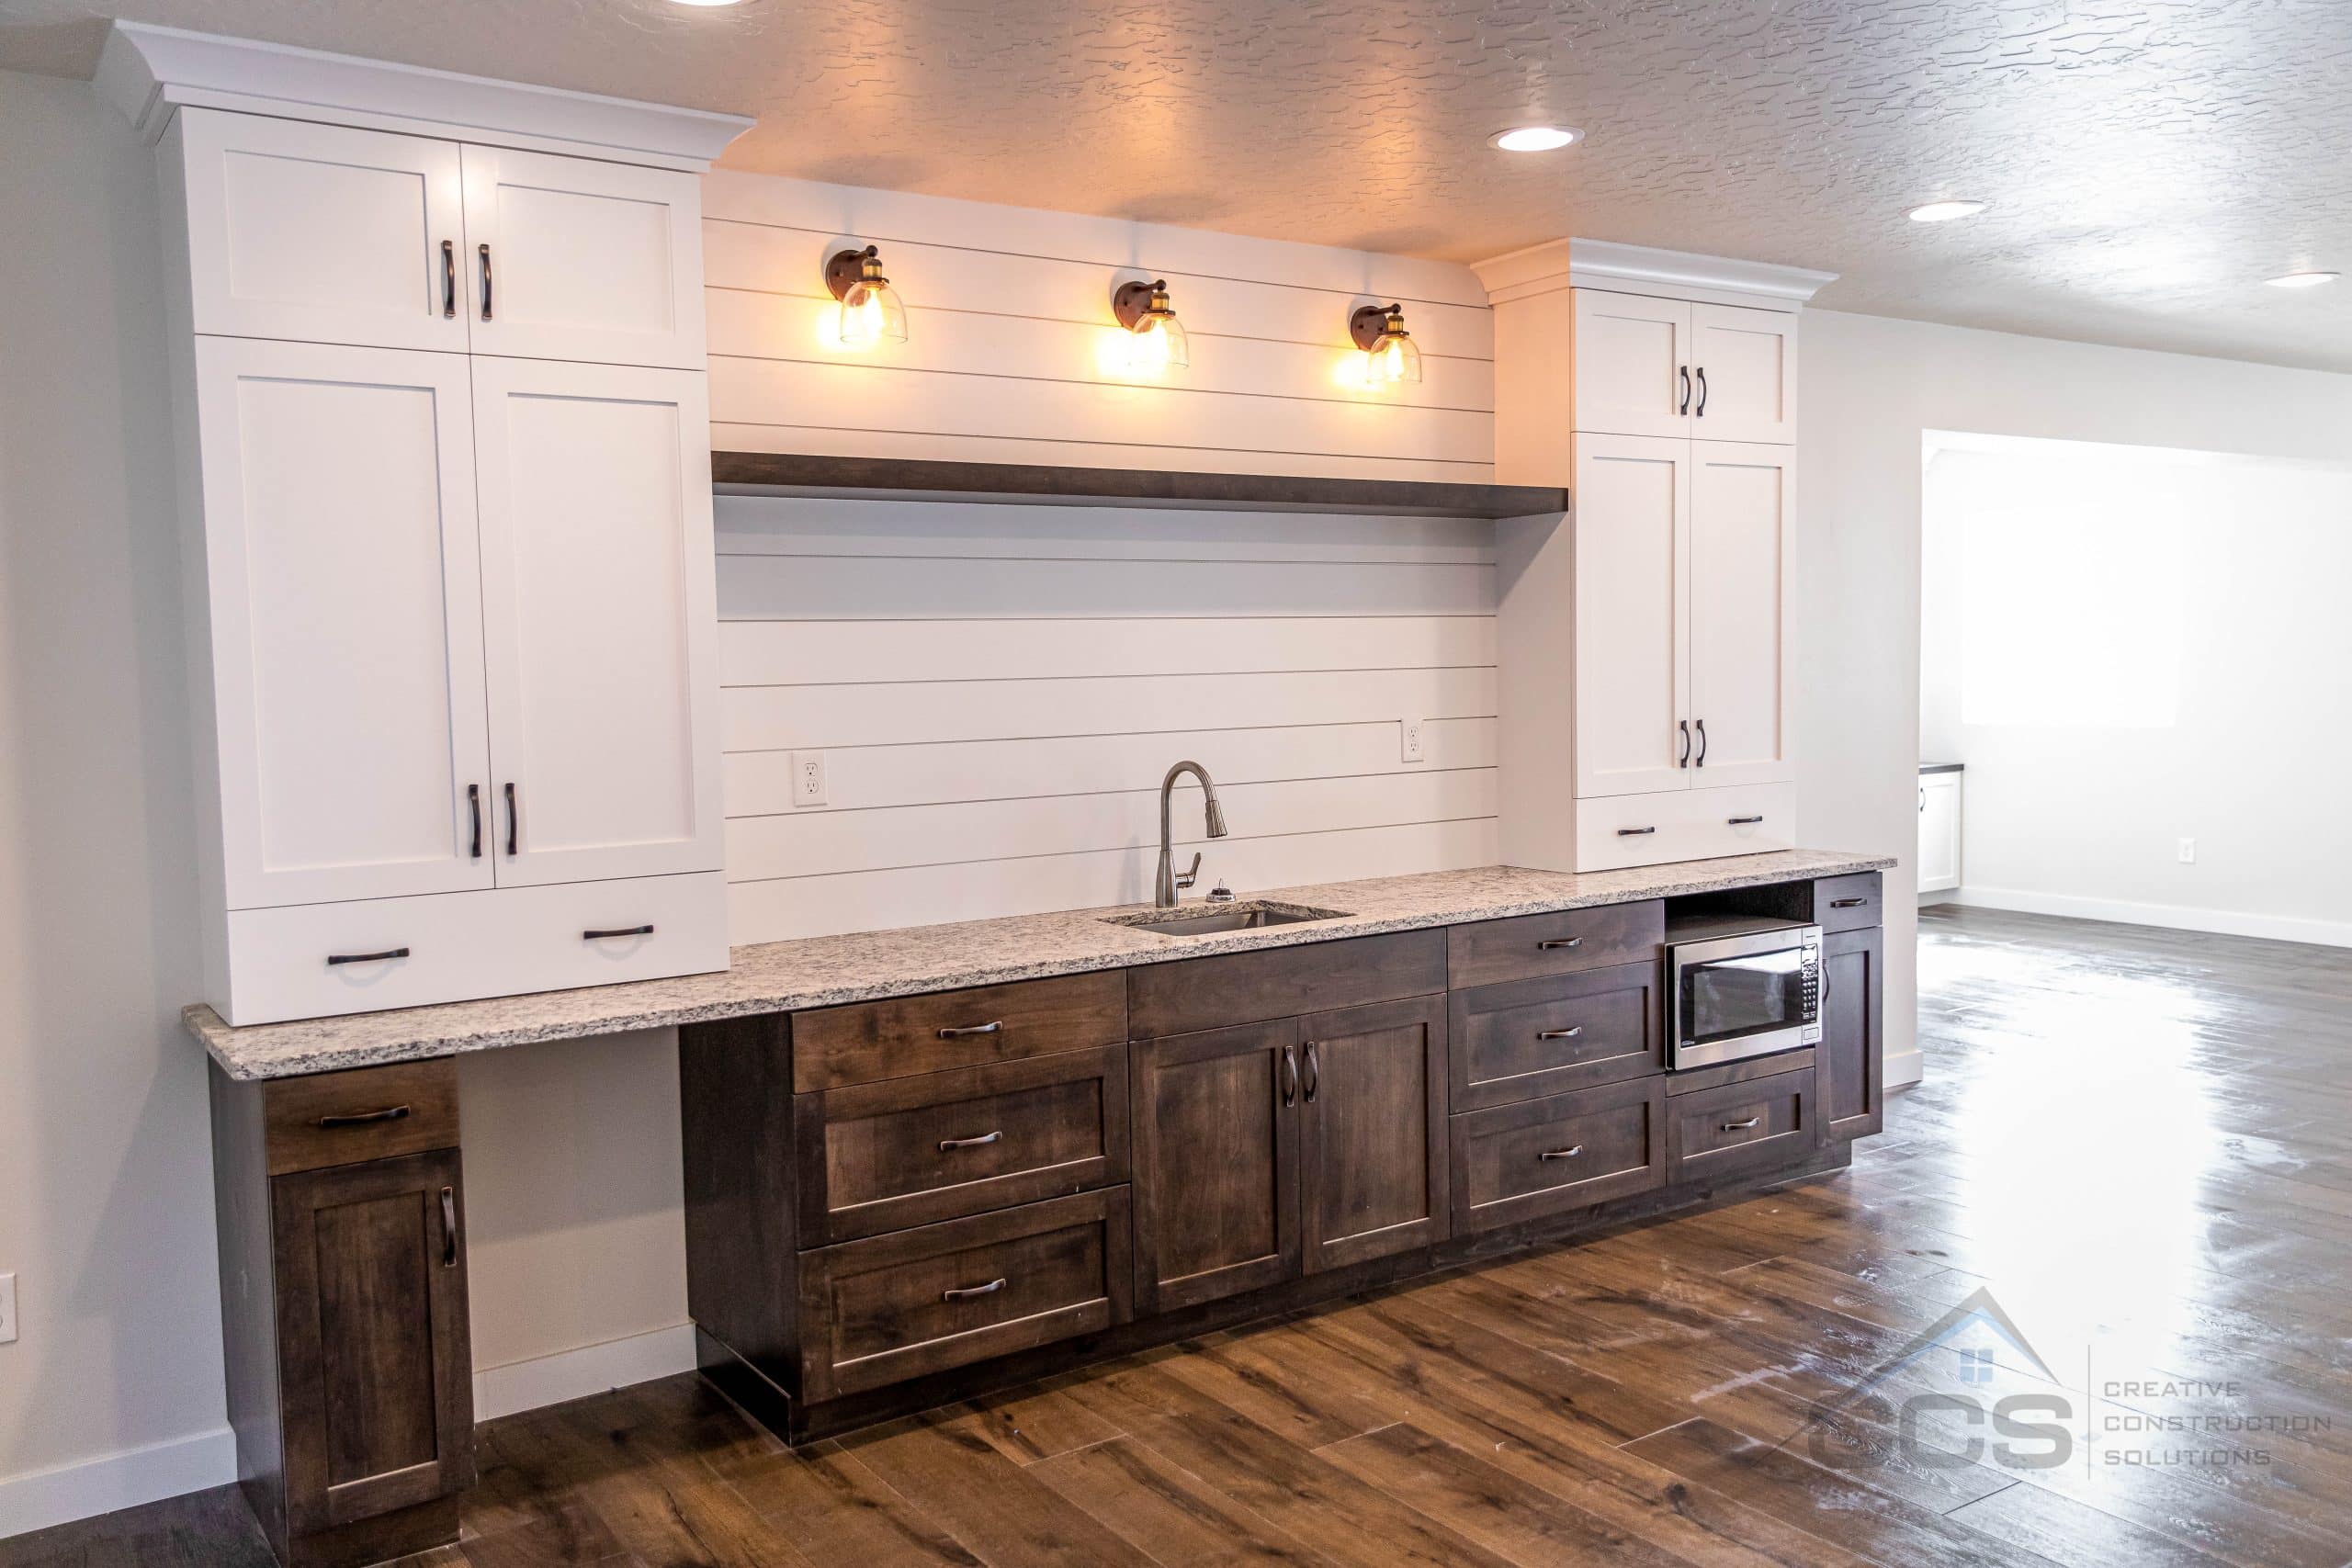 An image of a modern finished basement wet bar. Features include white cabinetry on the top with matching white clapboard. Dark oak stained cabinets below with matching floating shelves above sink. Granite countertops.